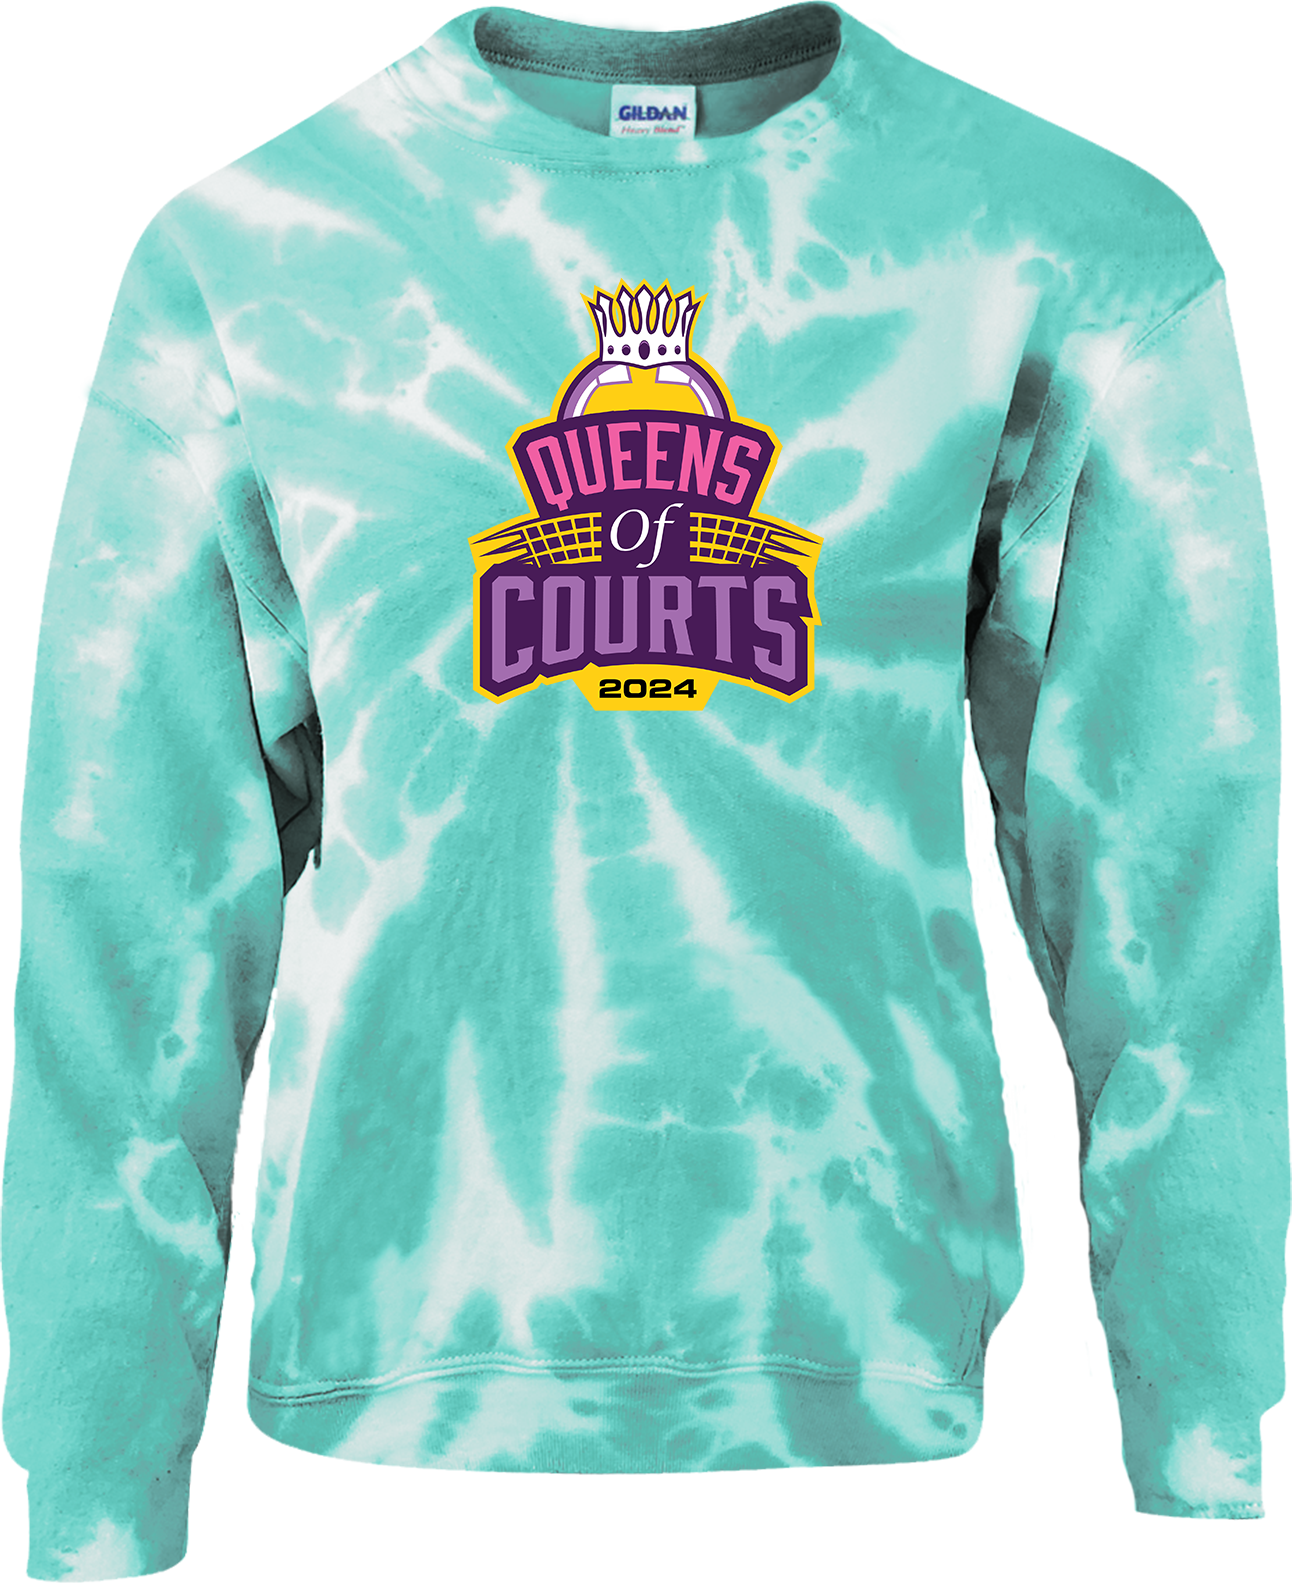 Crew Sweatershirt - 2024 Queens Of Courts